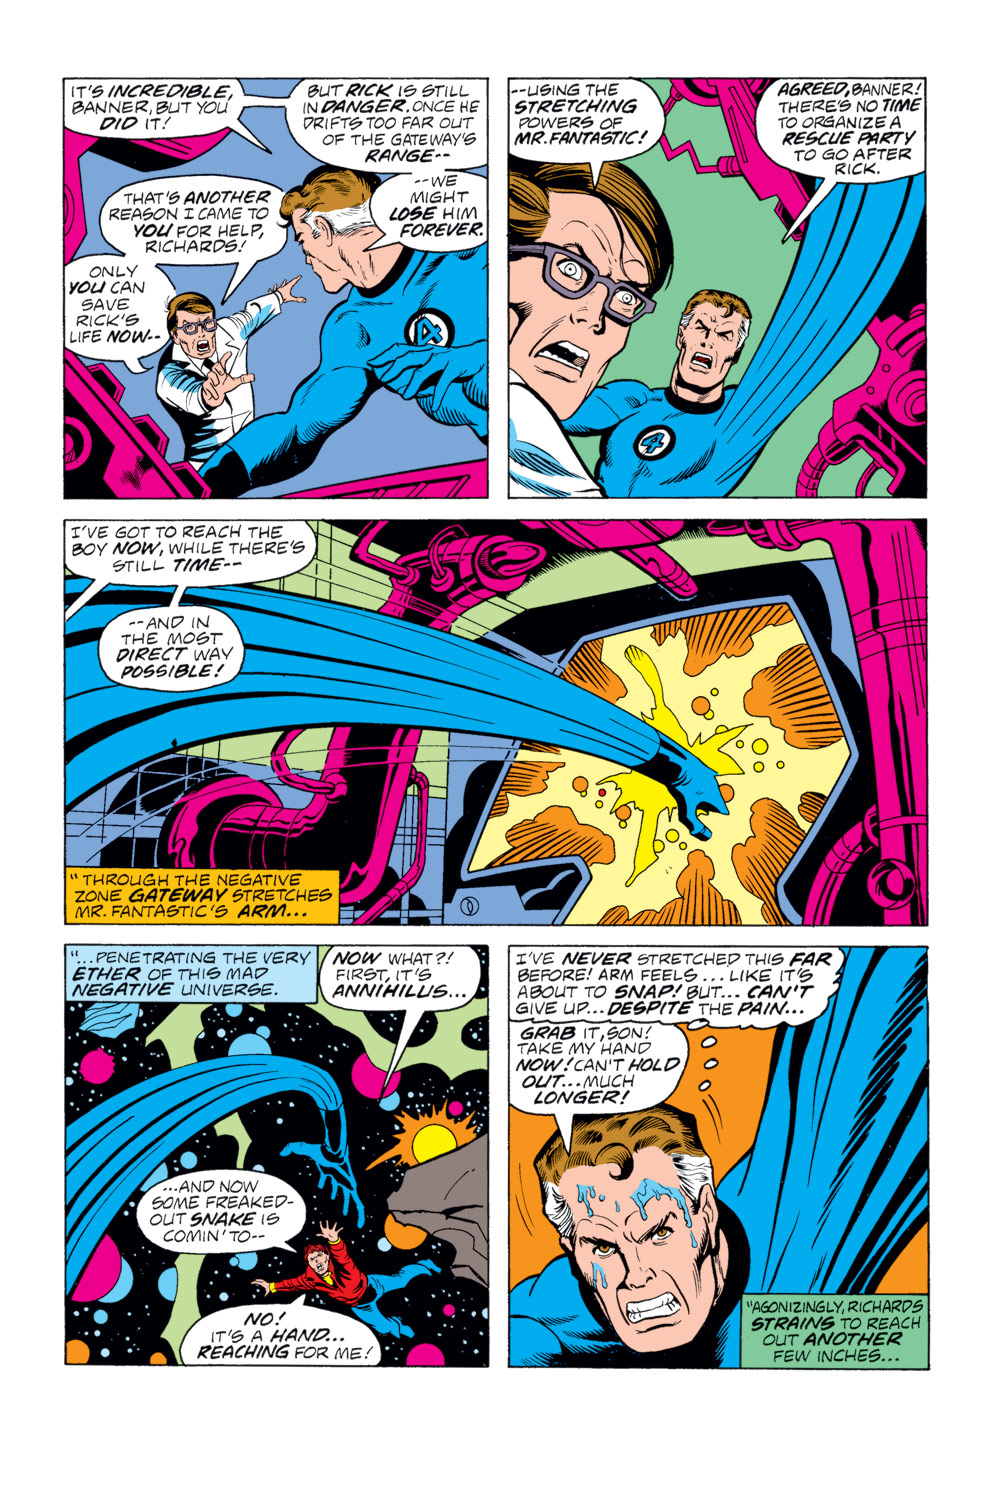 What If? (1977) issue 12 - Rick Jones had become the Hulk - Page 28